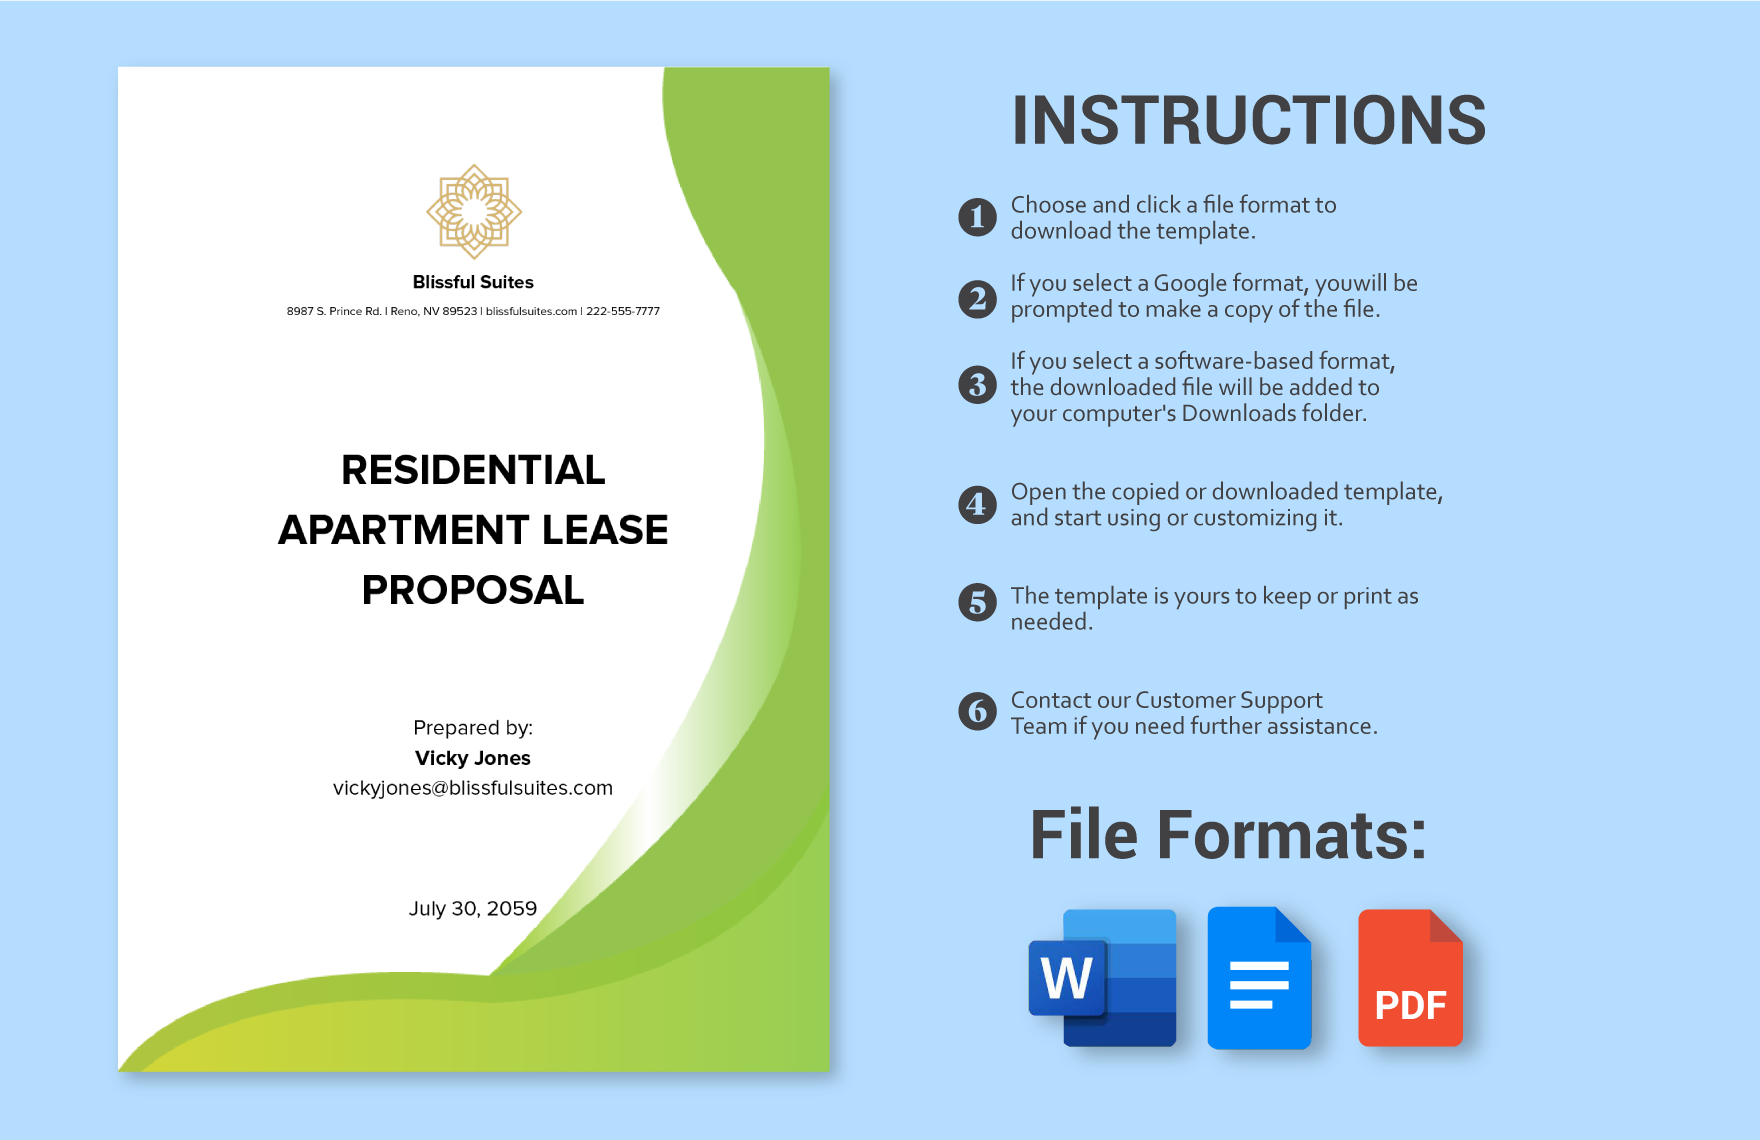 Sample Residential Apartment Lease Proposal Template